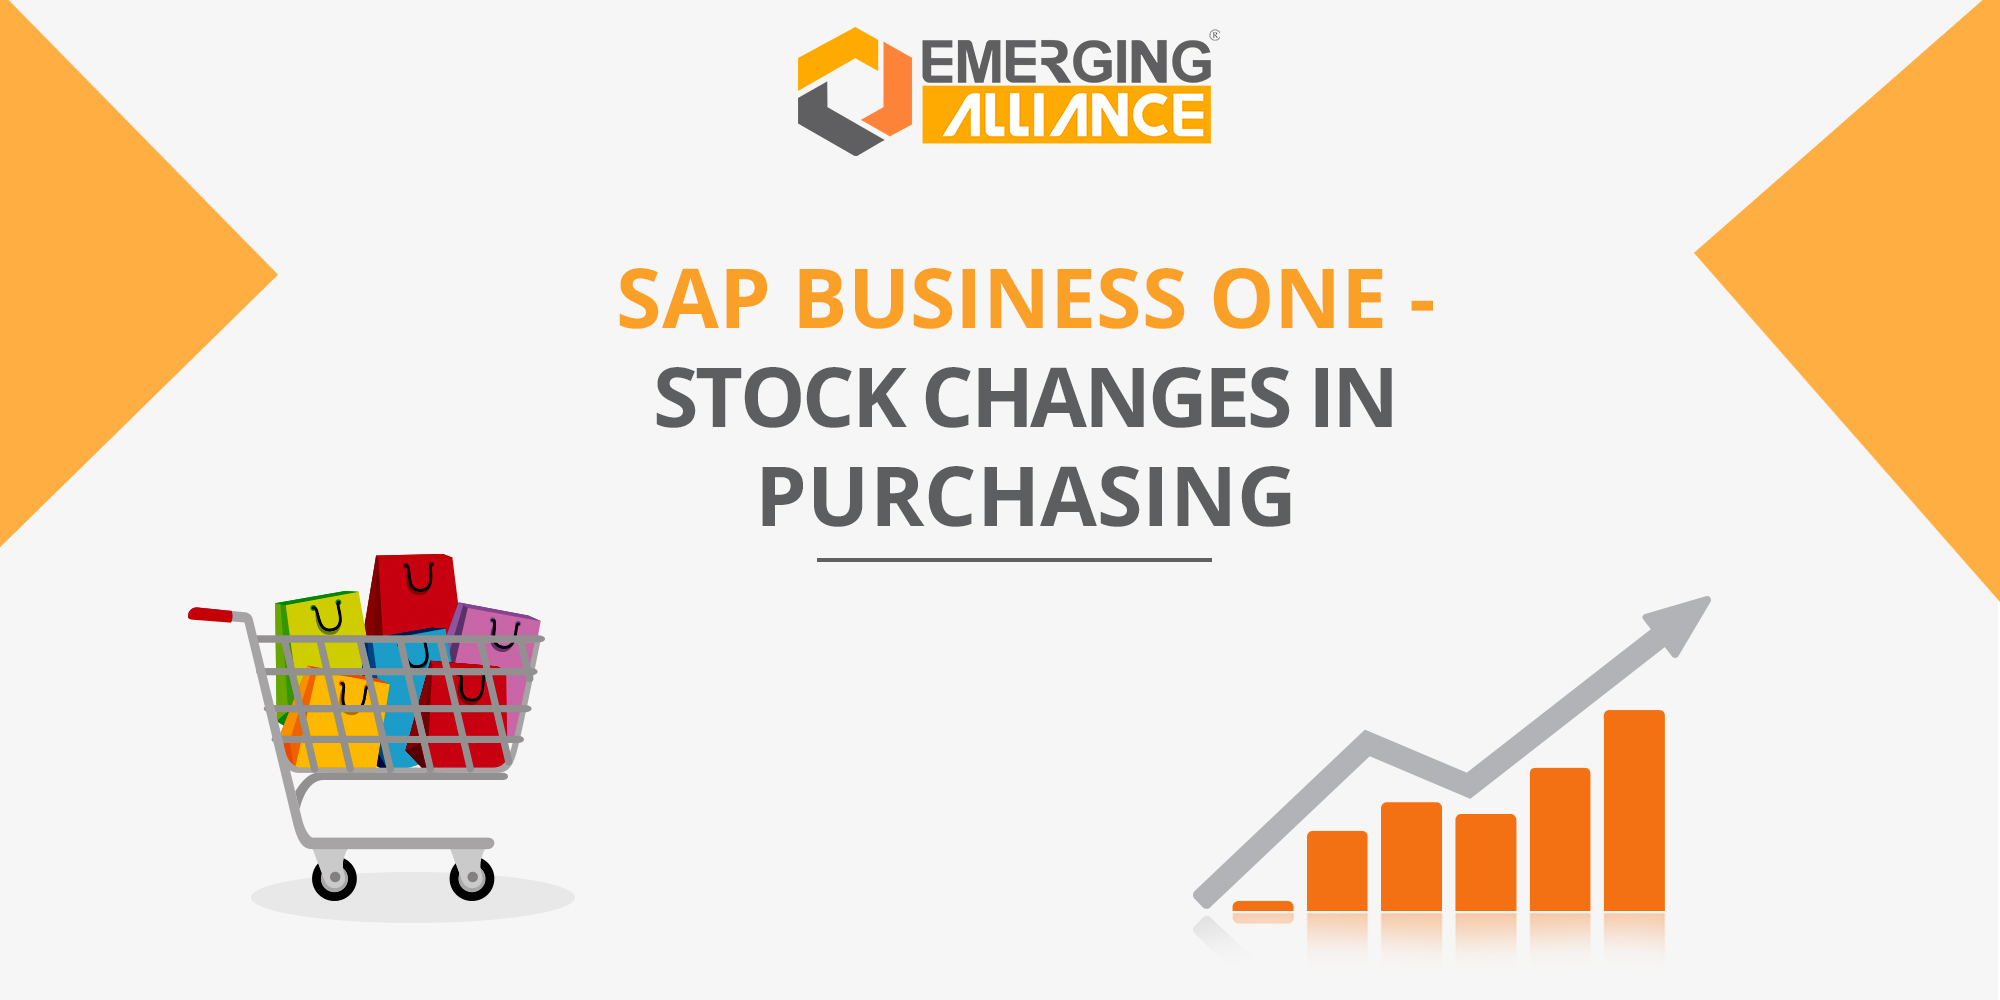 stock changes in purchasing - SAP Business One